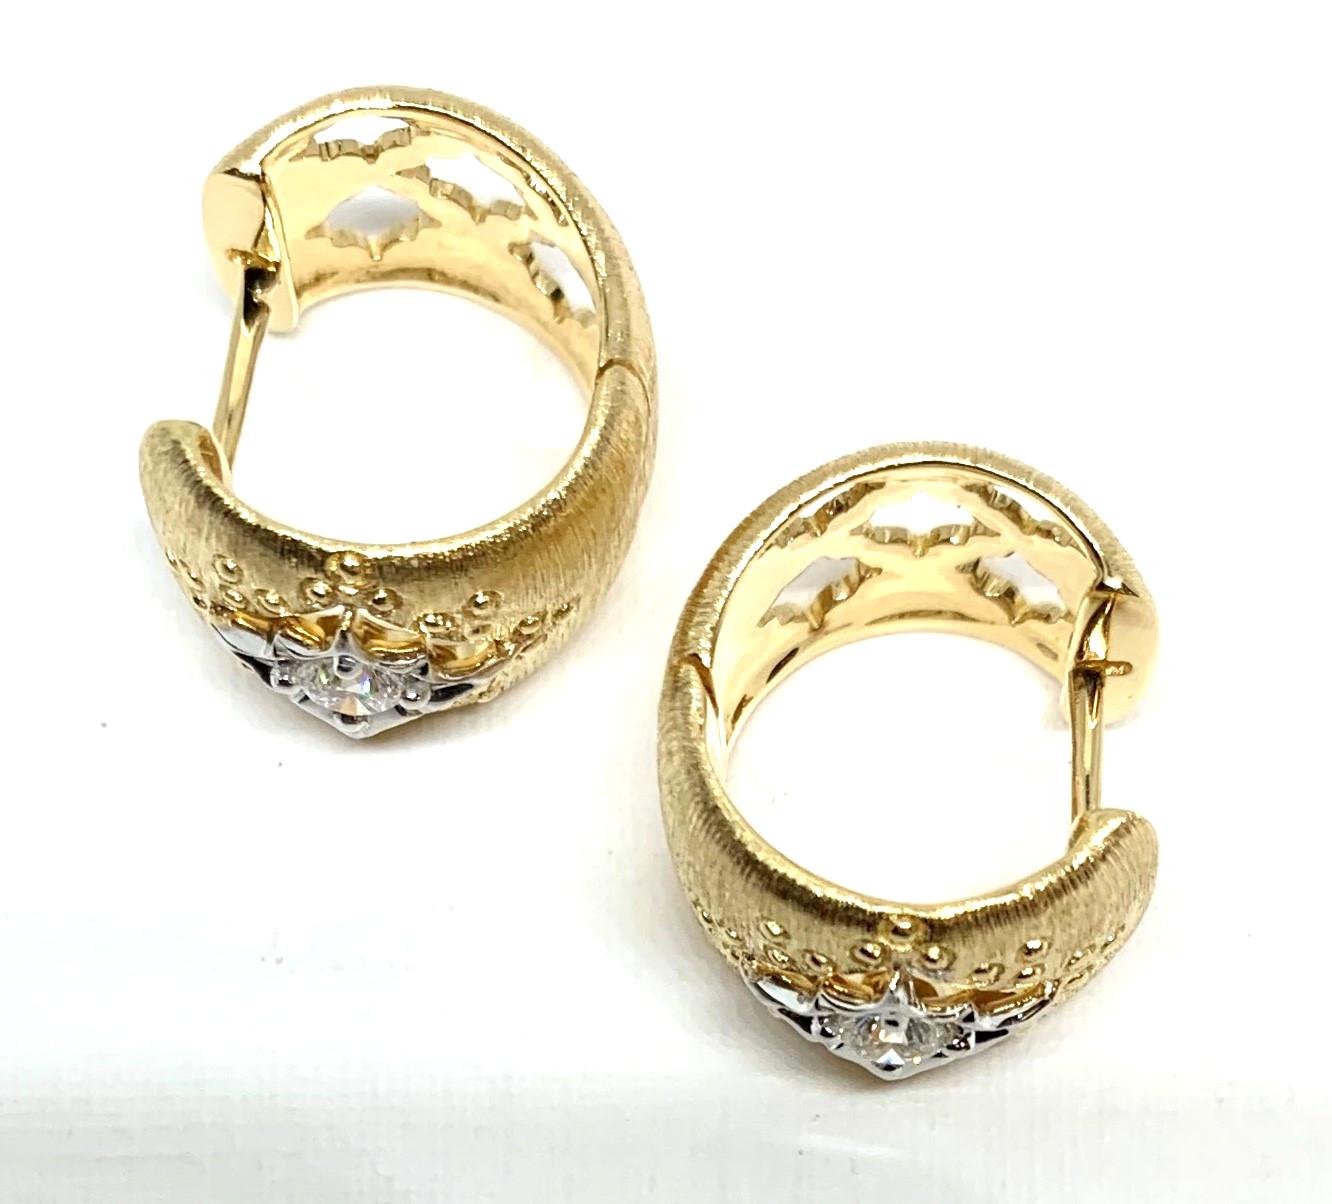 These Florentine inspired hoops feature two round, brilliant cut diamonds set in 18k yellow and white gold earrings with hinged backs. With lovely open gold work and refined, textured details, these earrings are beautiful from the front and the back